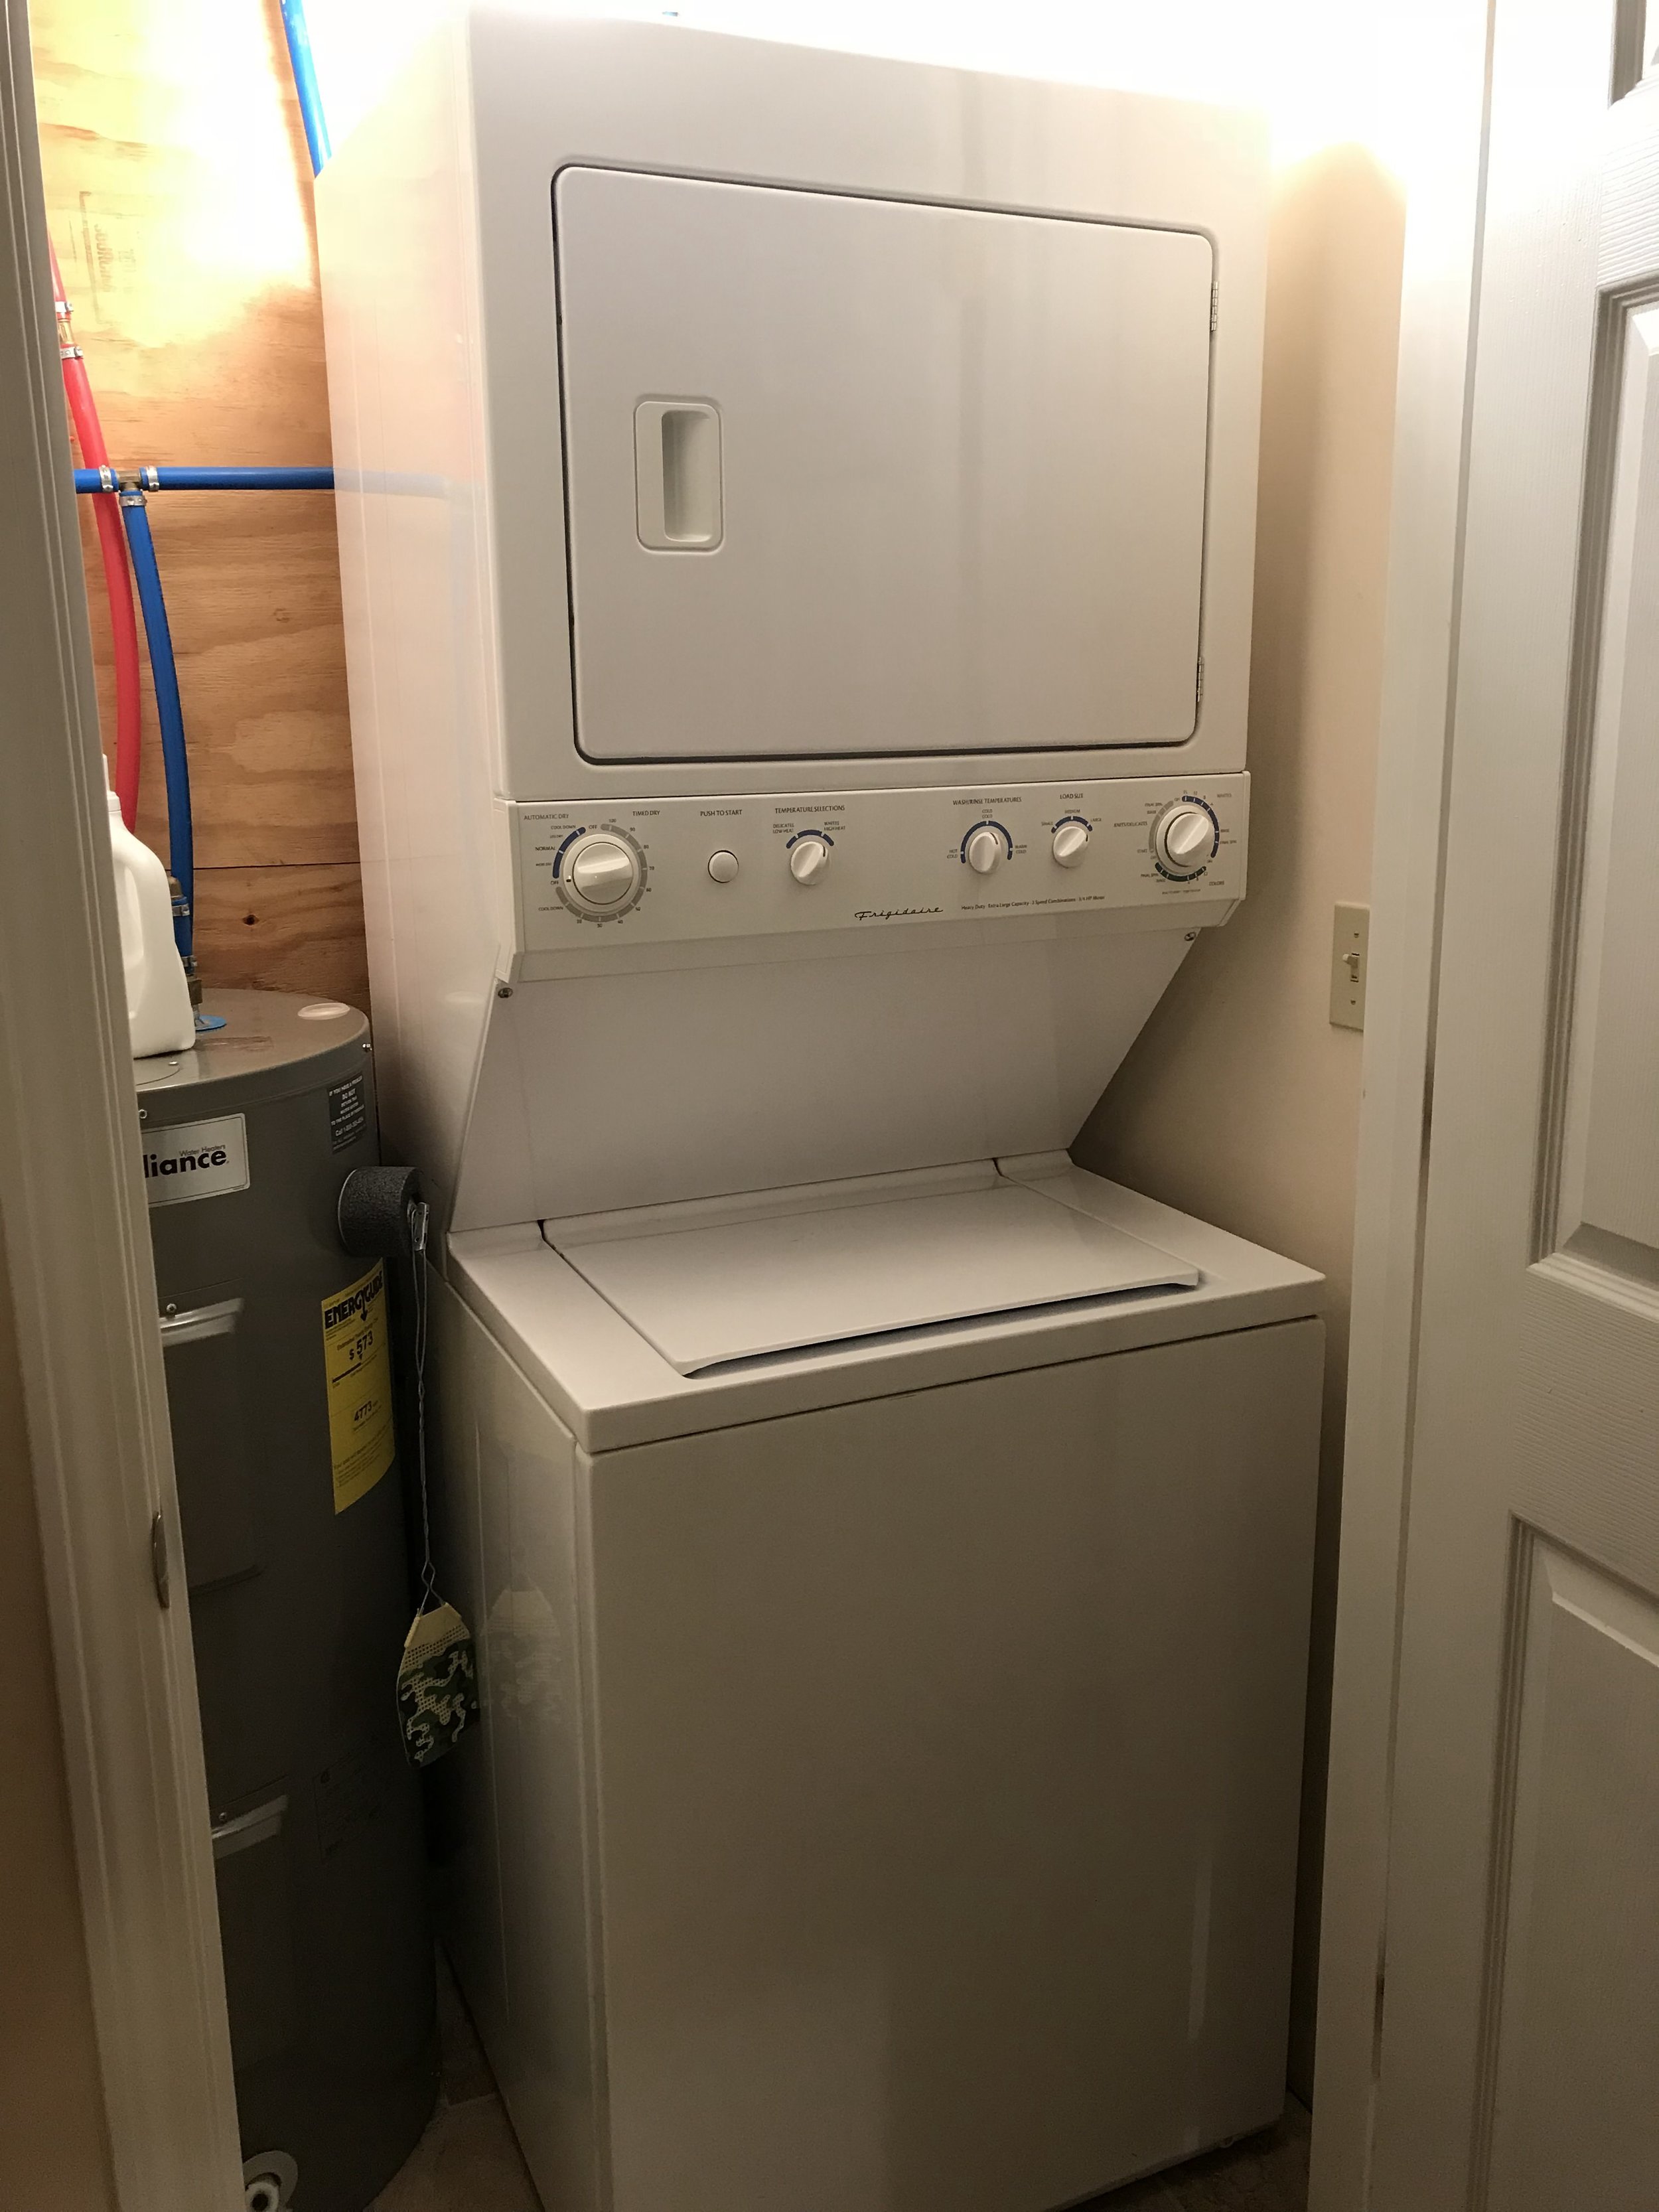 Washer and Dryer.jpg